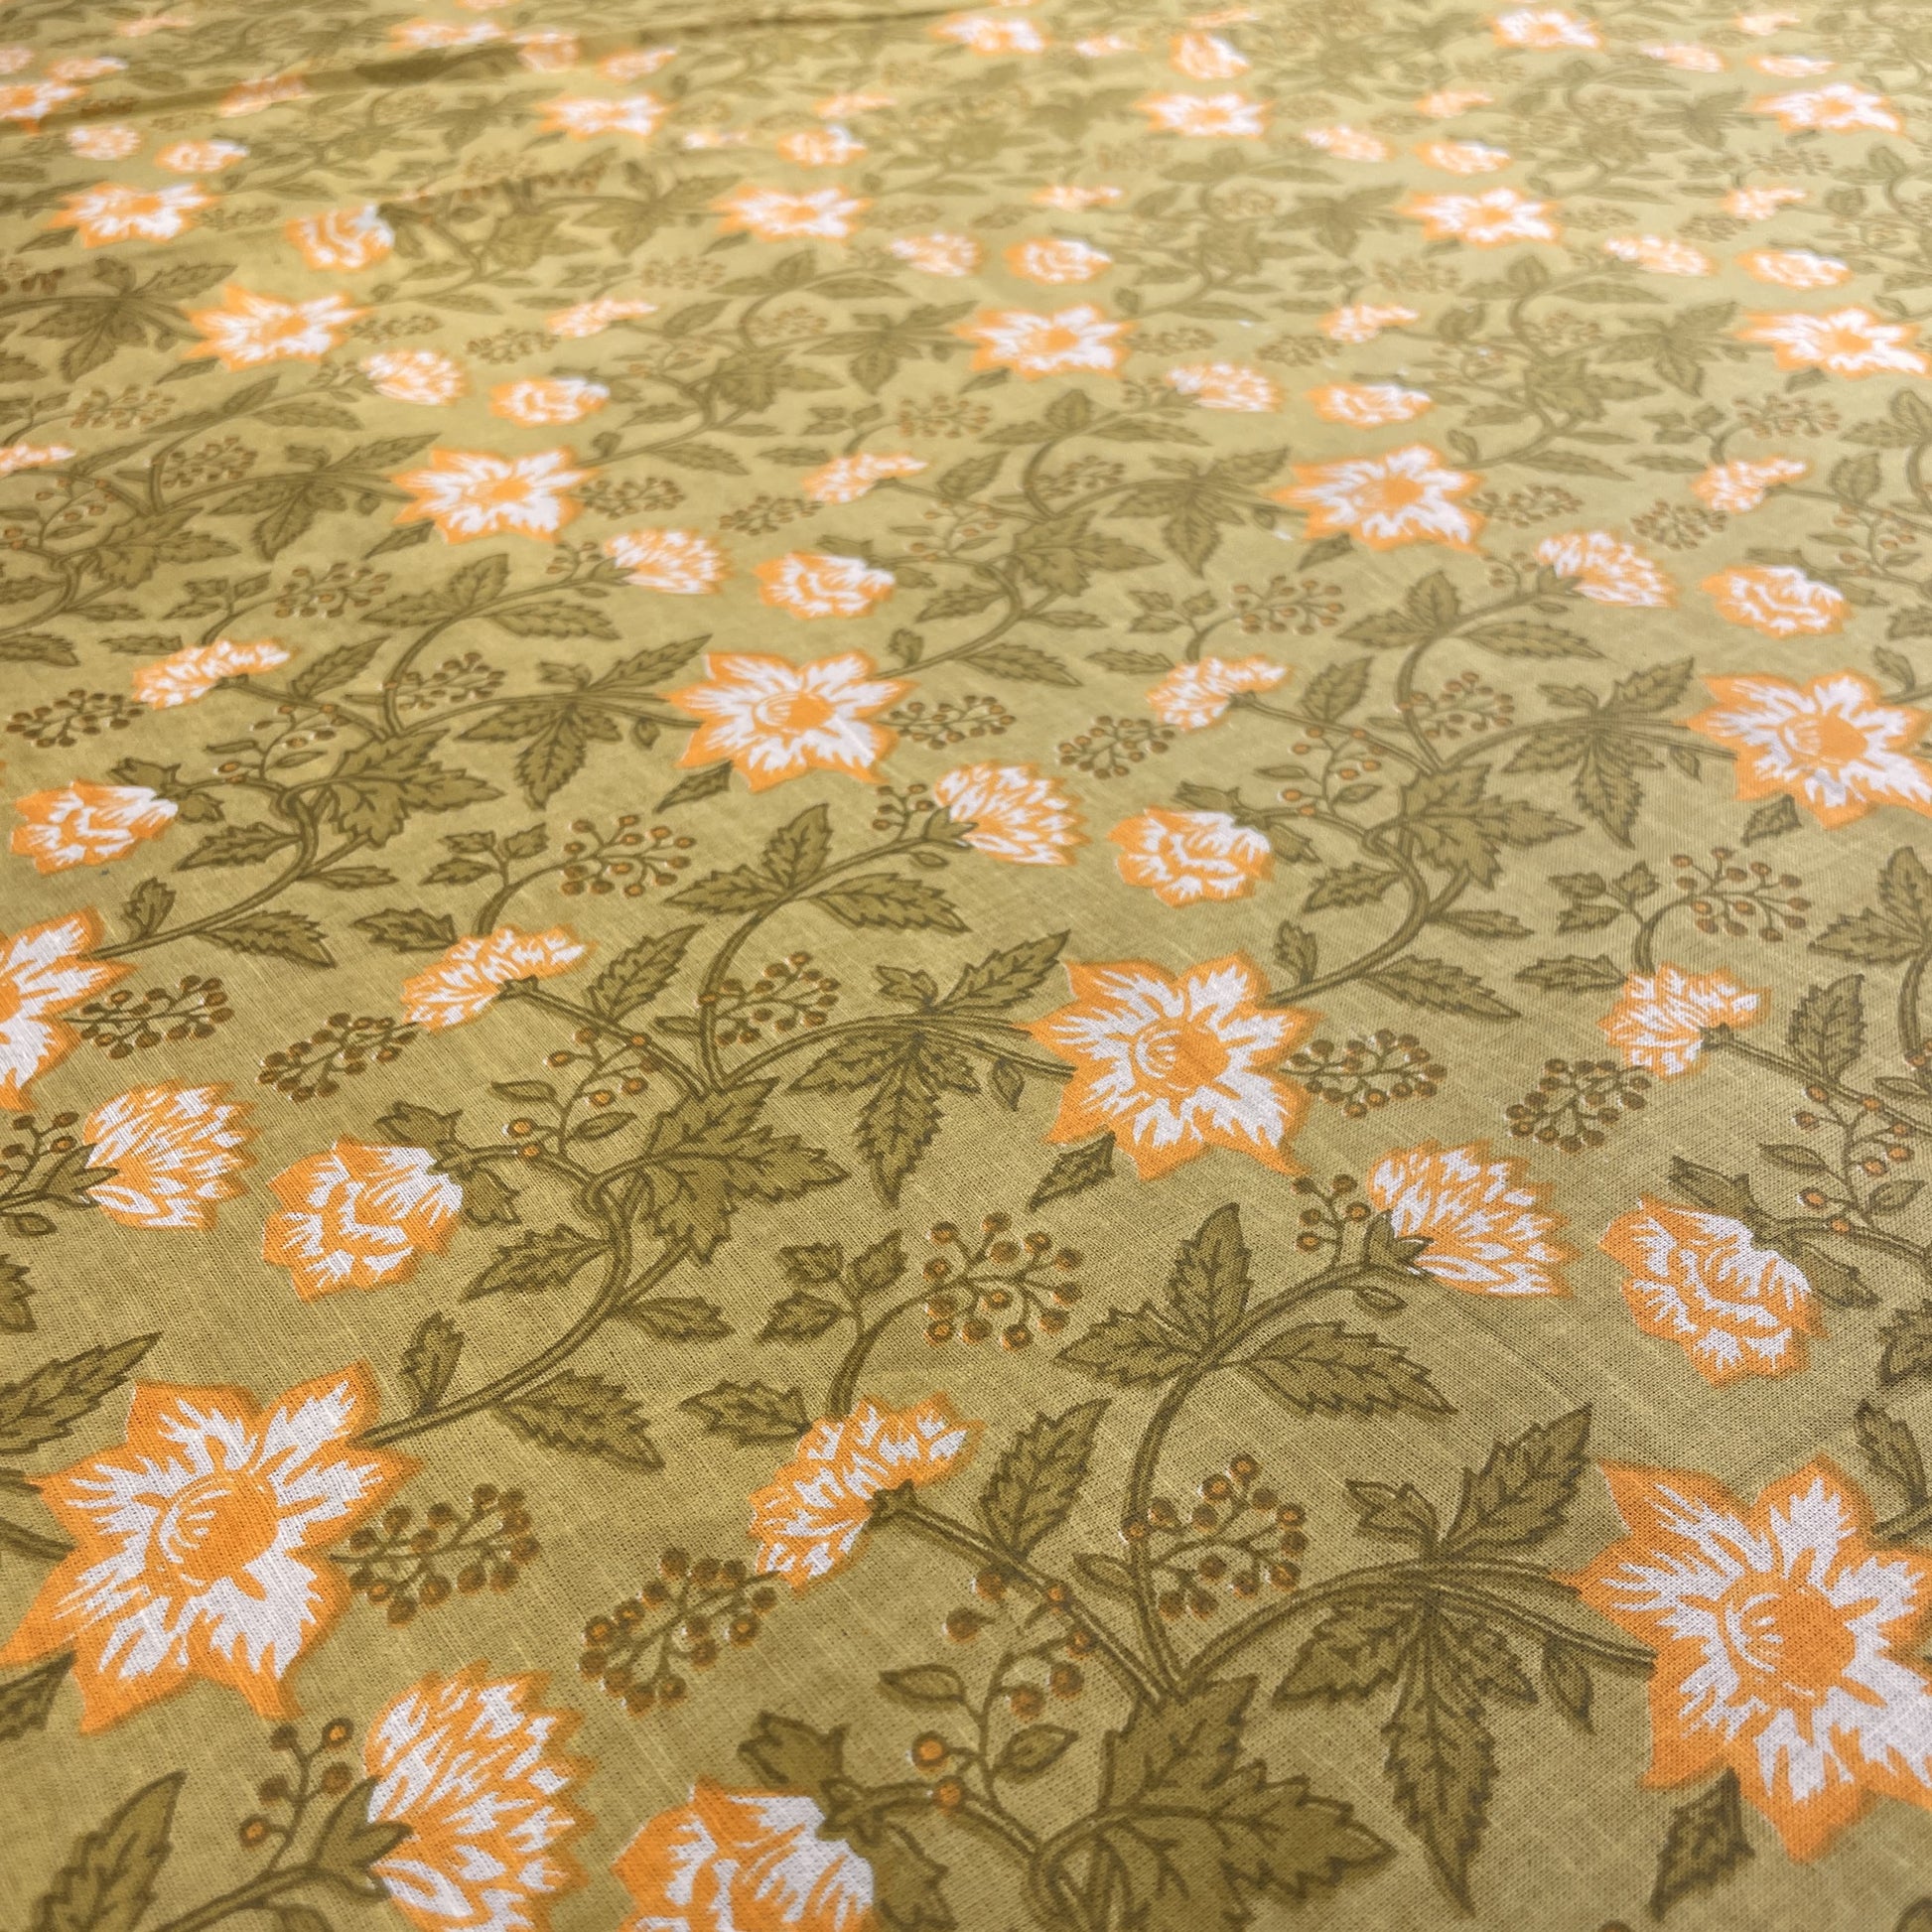 Olive Green Floral Print Cotton Fabric